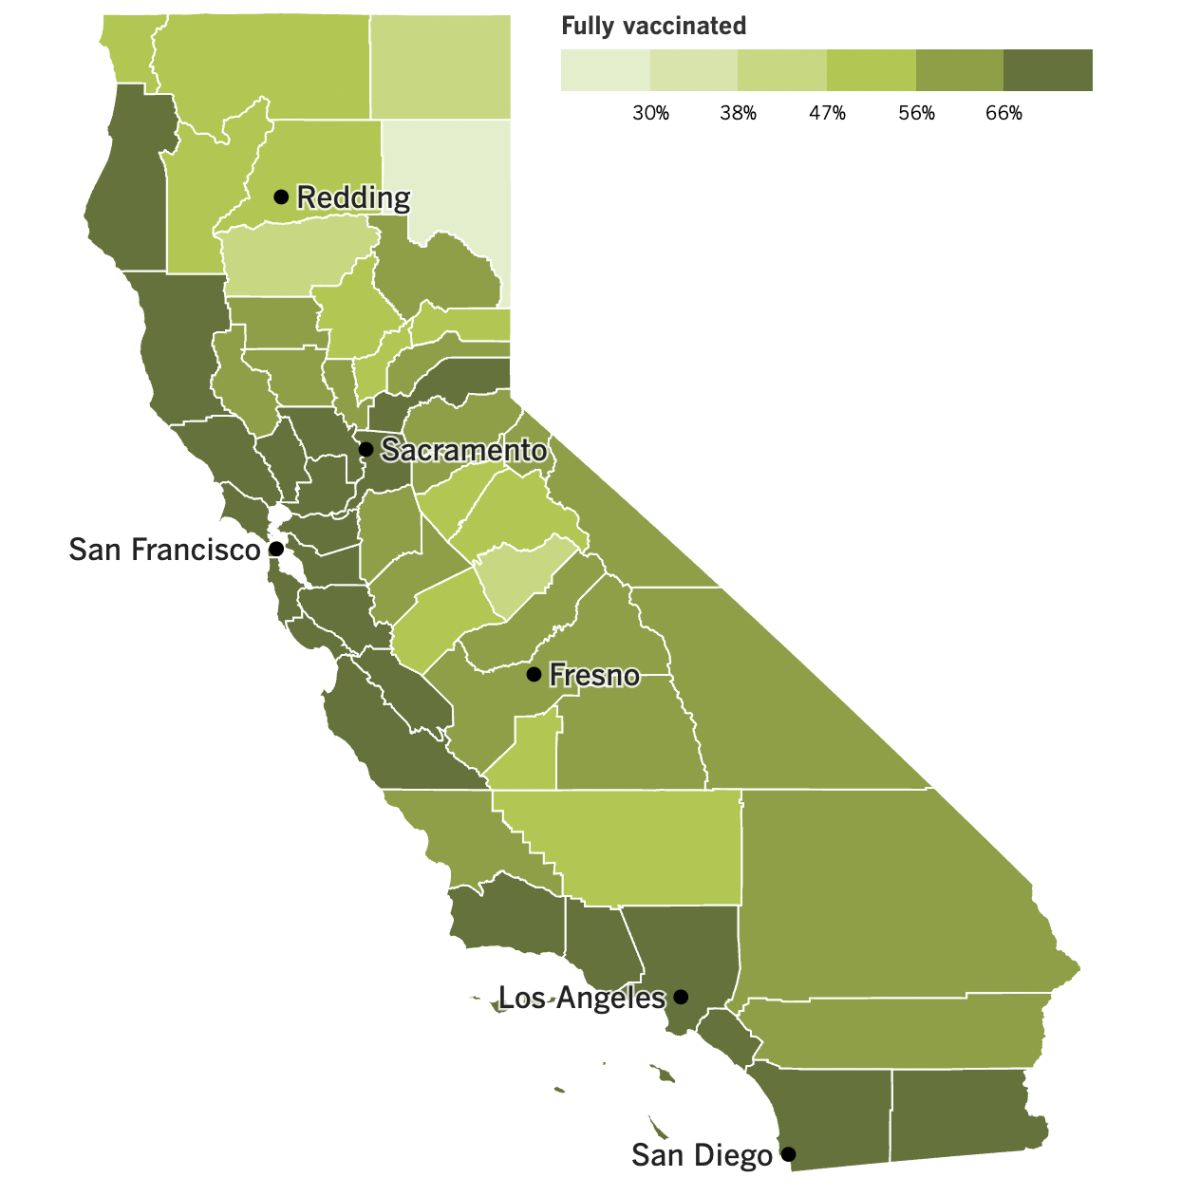 A map showing California's vaccination progress by county as of Sept. 6, 2022.